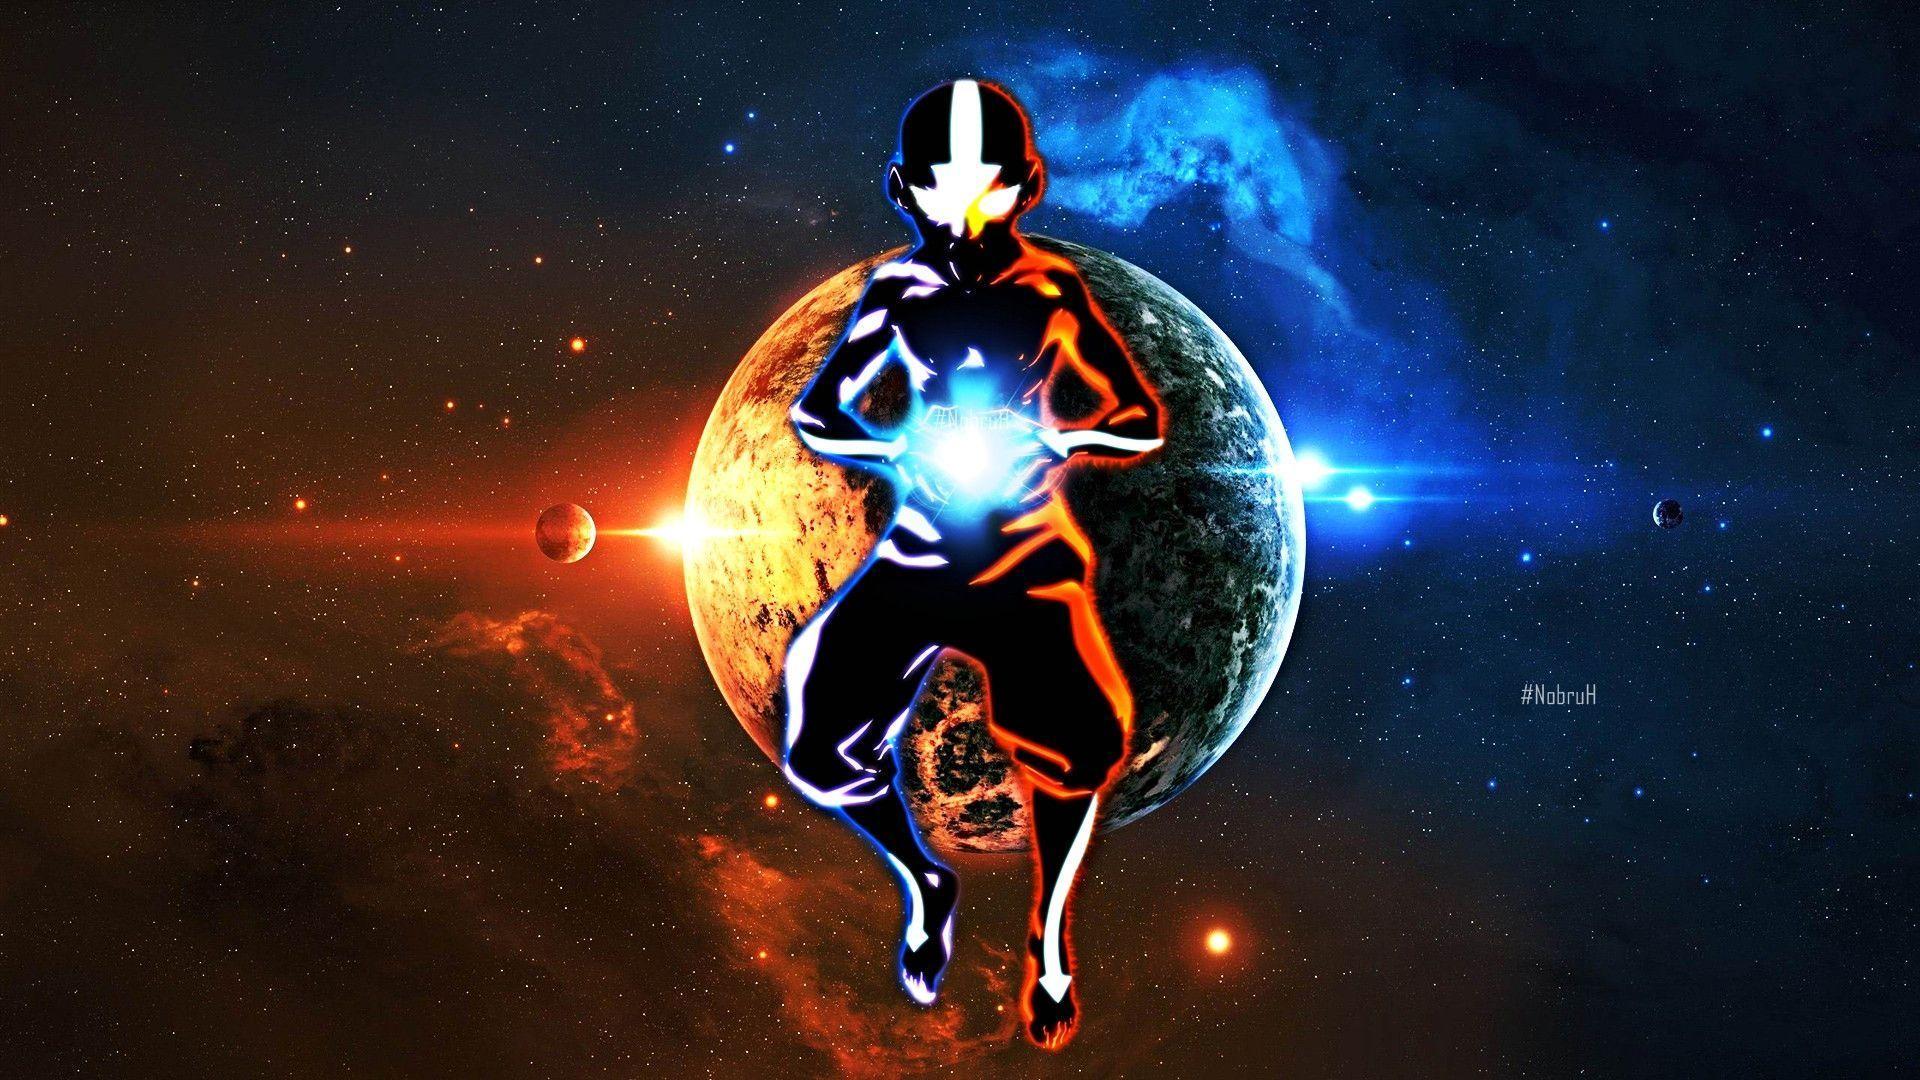 image For > Avatar The Last Airbender Wallpaper Aang